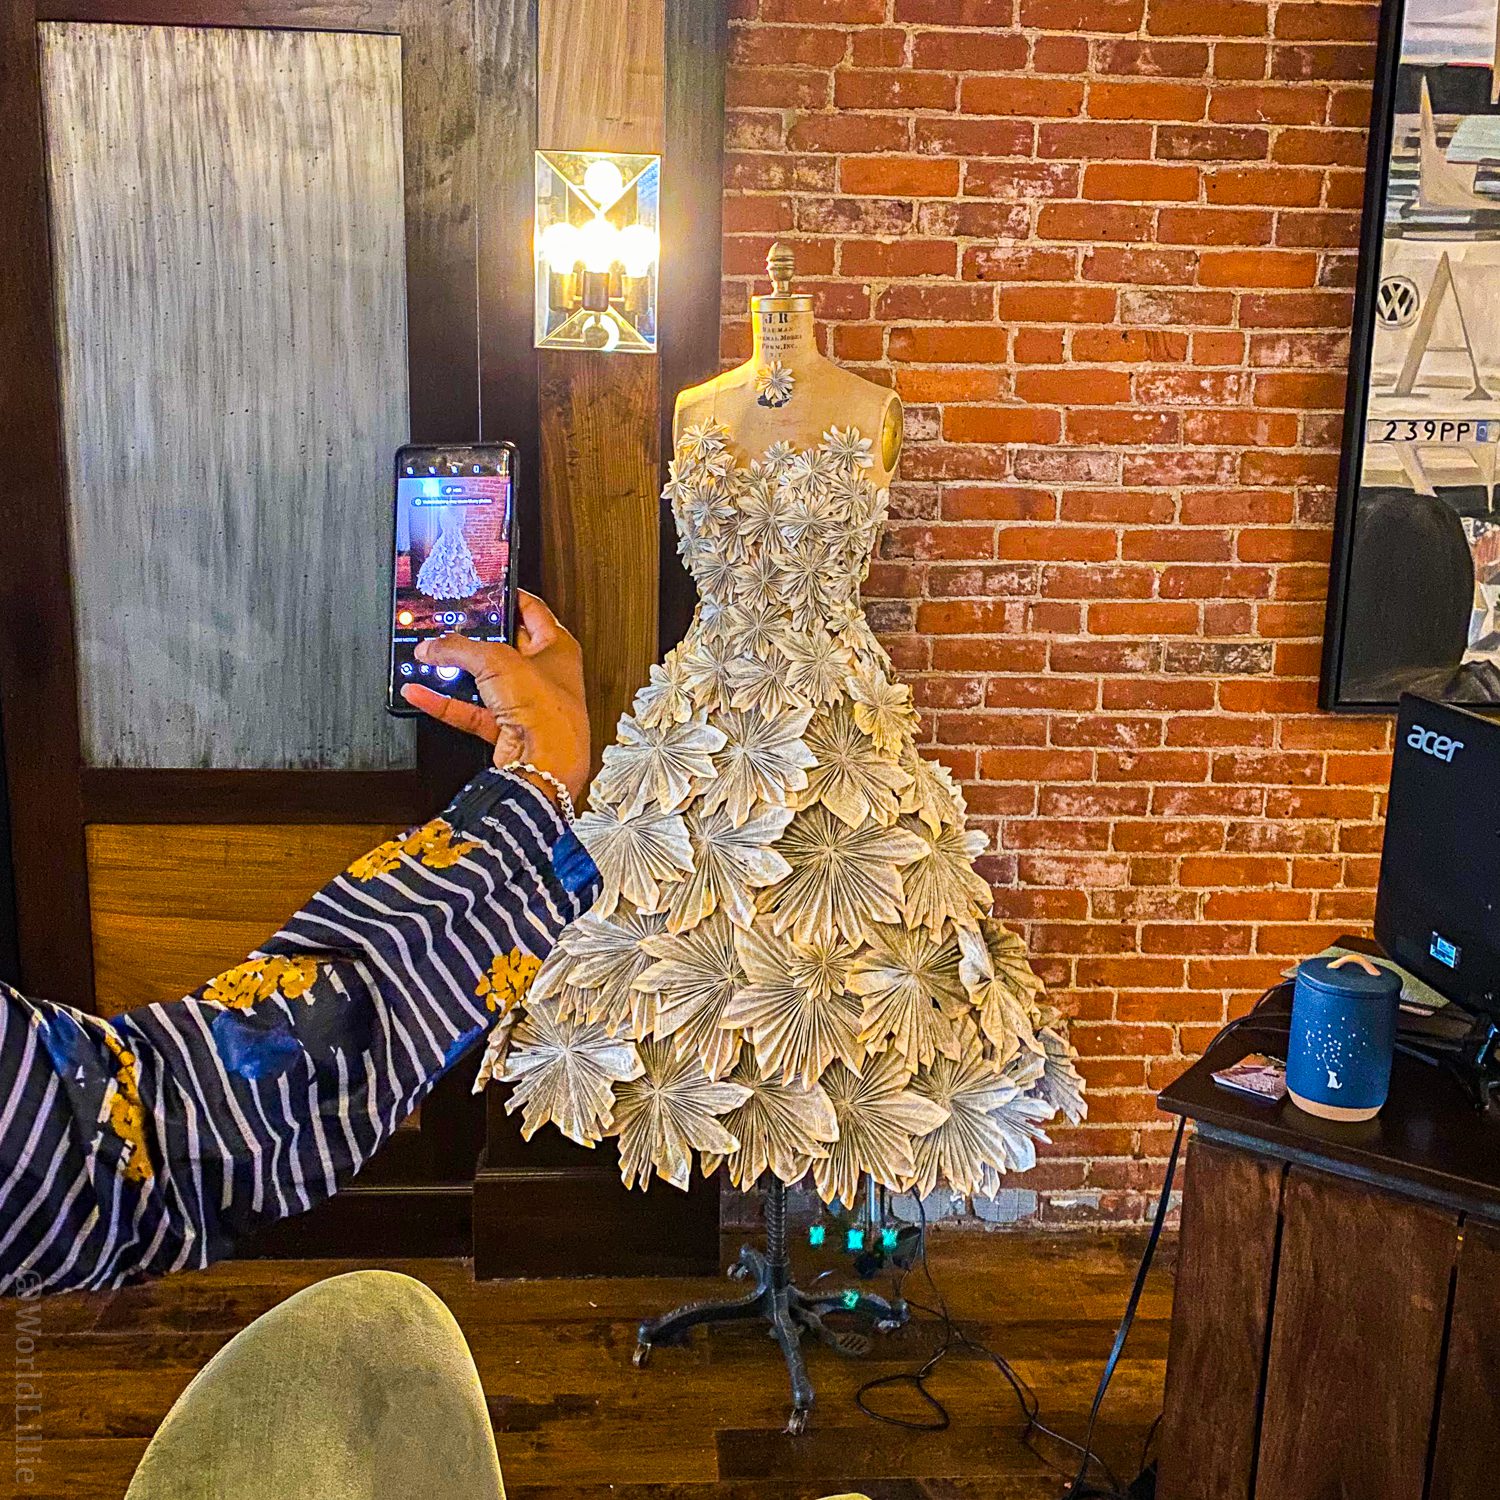 In the lobby there's a dress made out of pages from books!